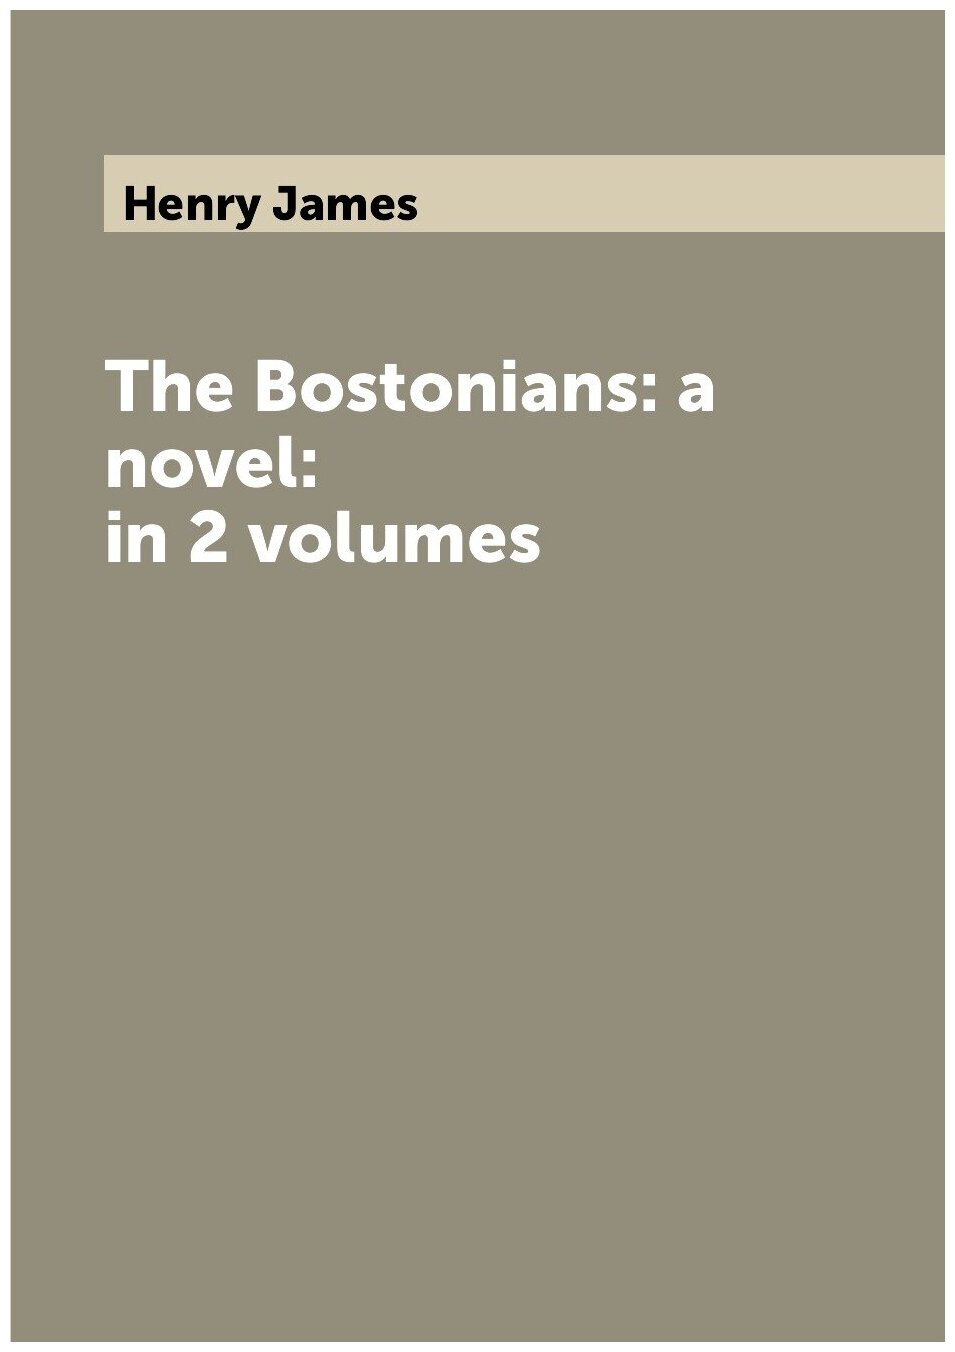 The Bostonians: a novel: in 2 volumes